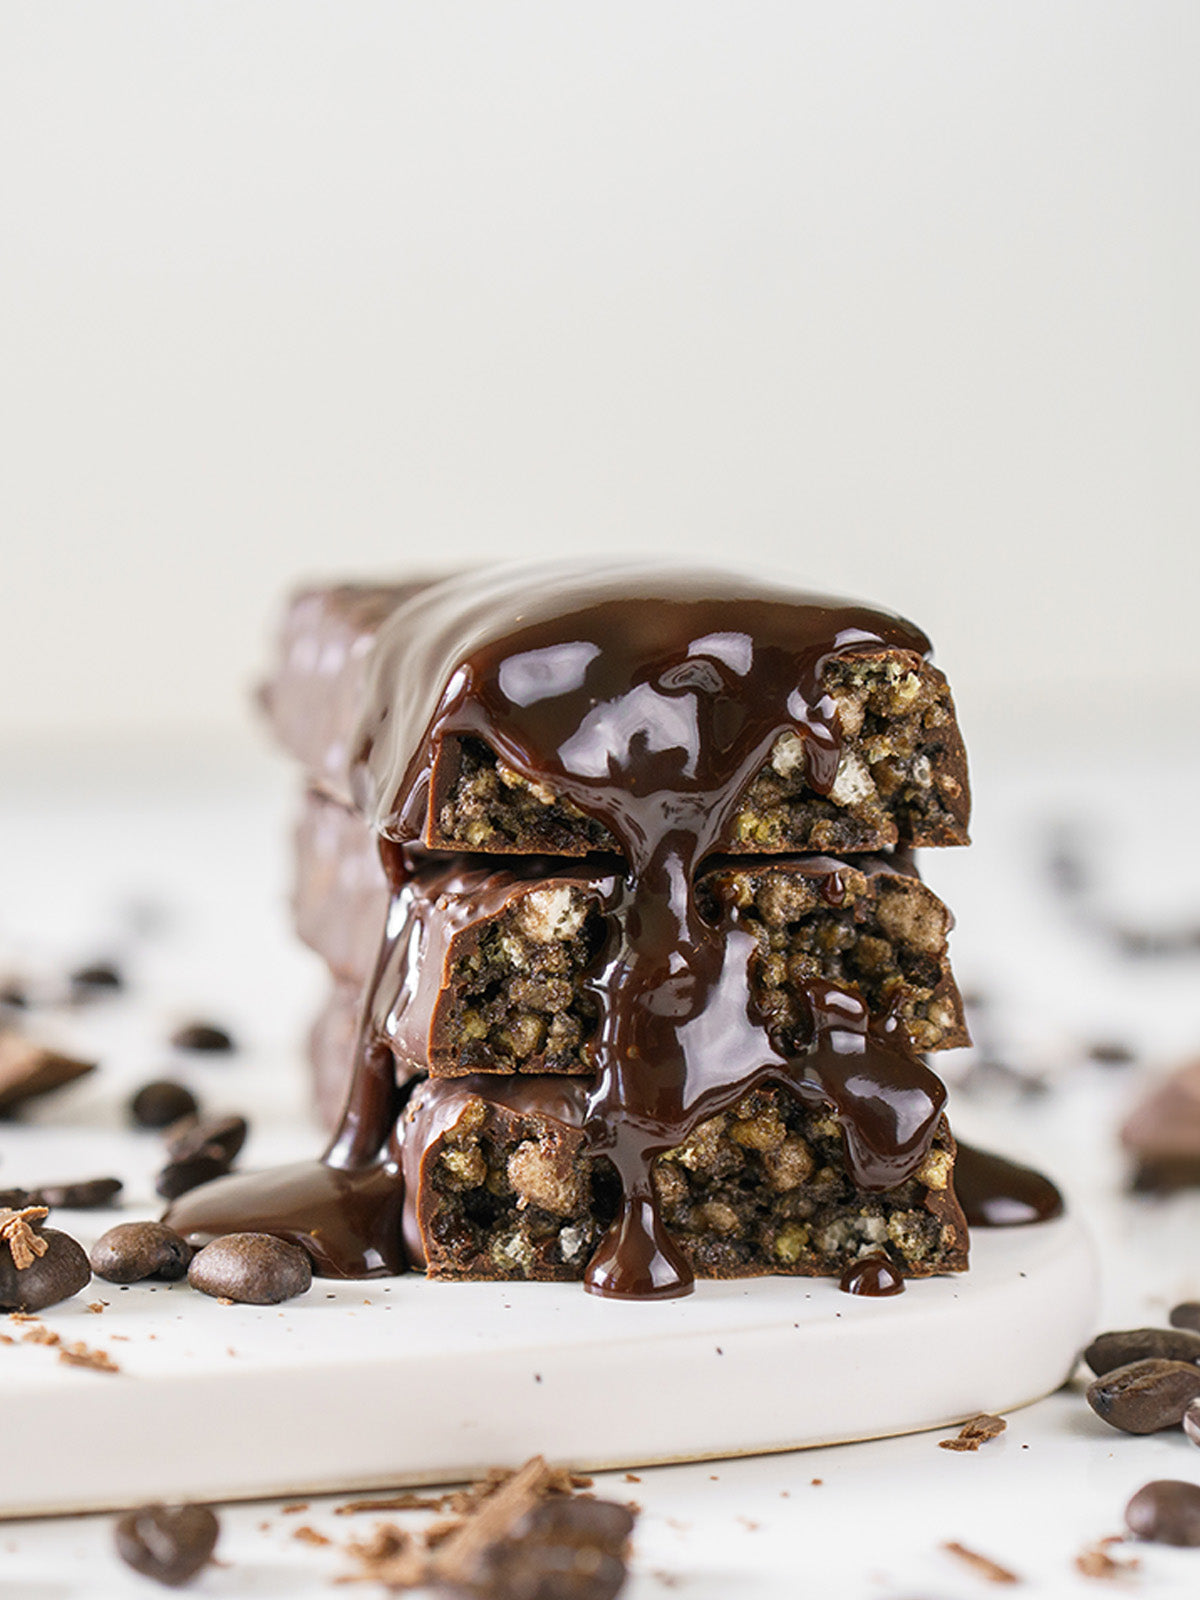 NuGo Dark Drizzled with Dark Chocolate and surrounded by Chocolate Pieces